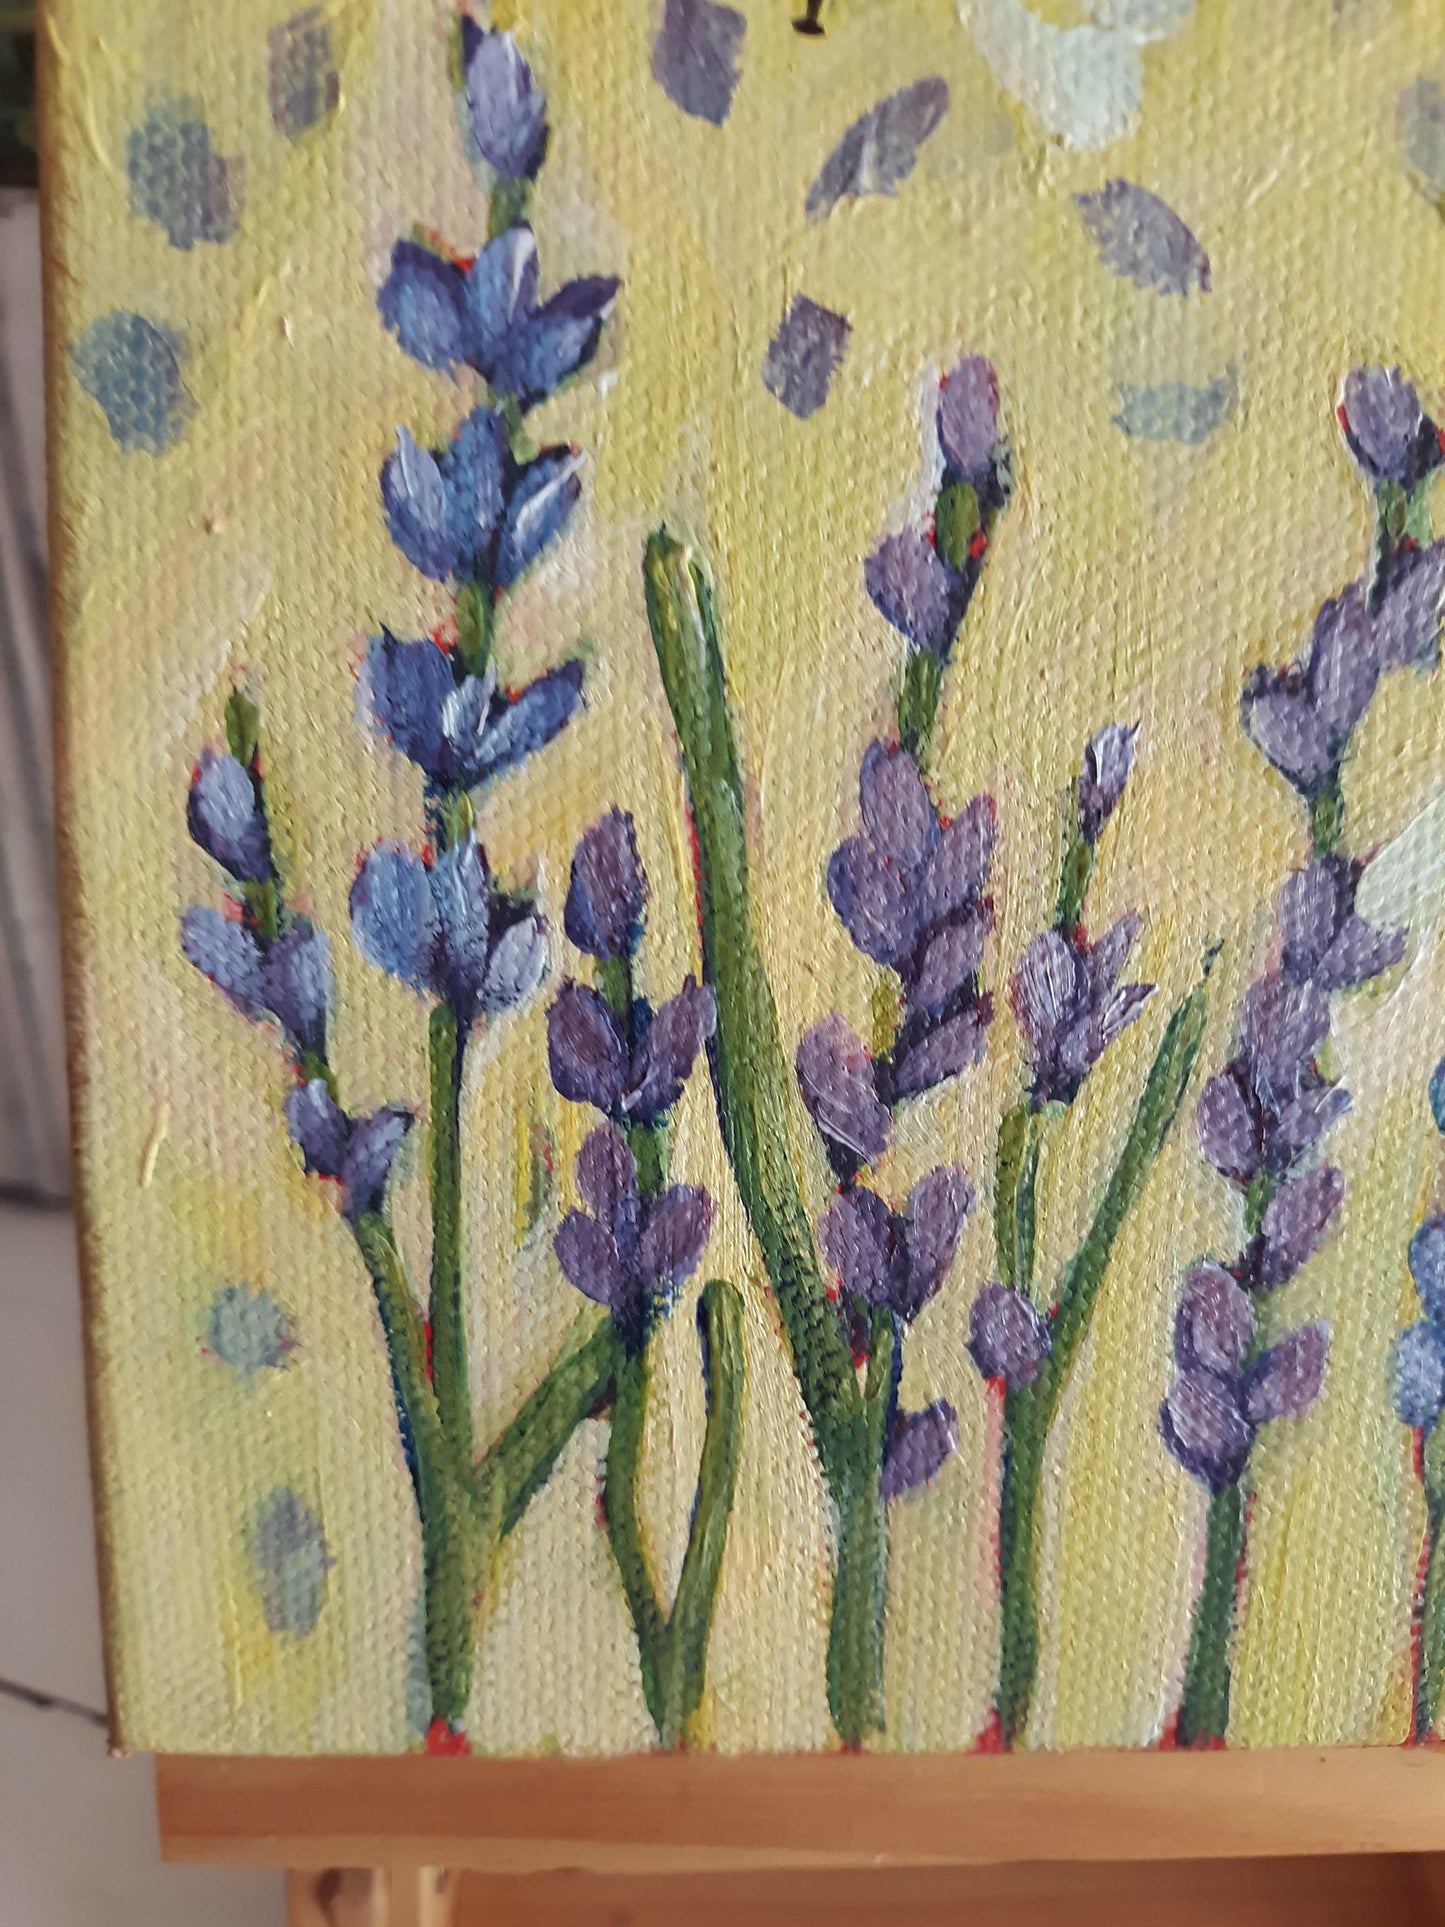 Buzz, Buzz Floral Painting